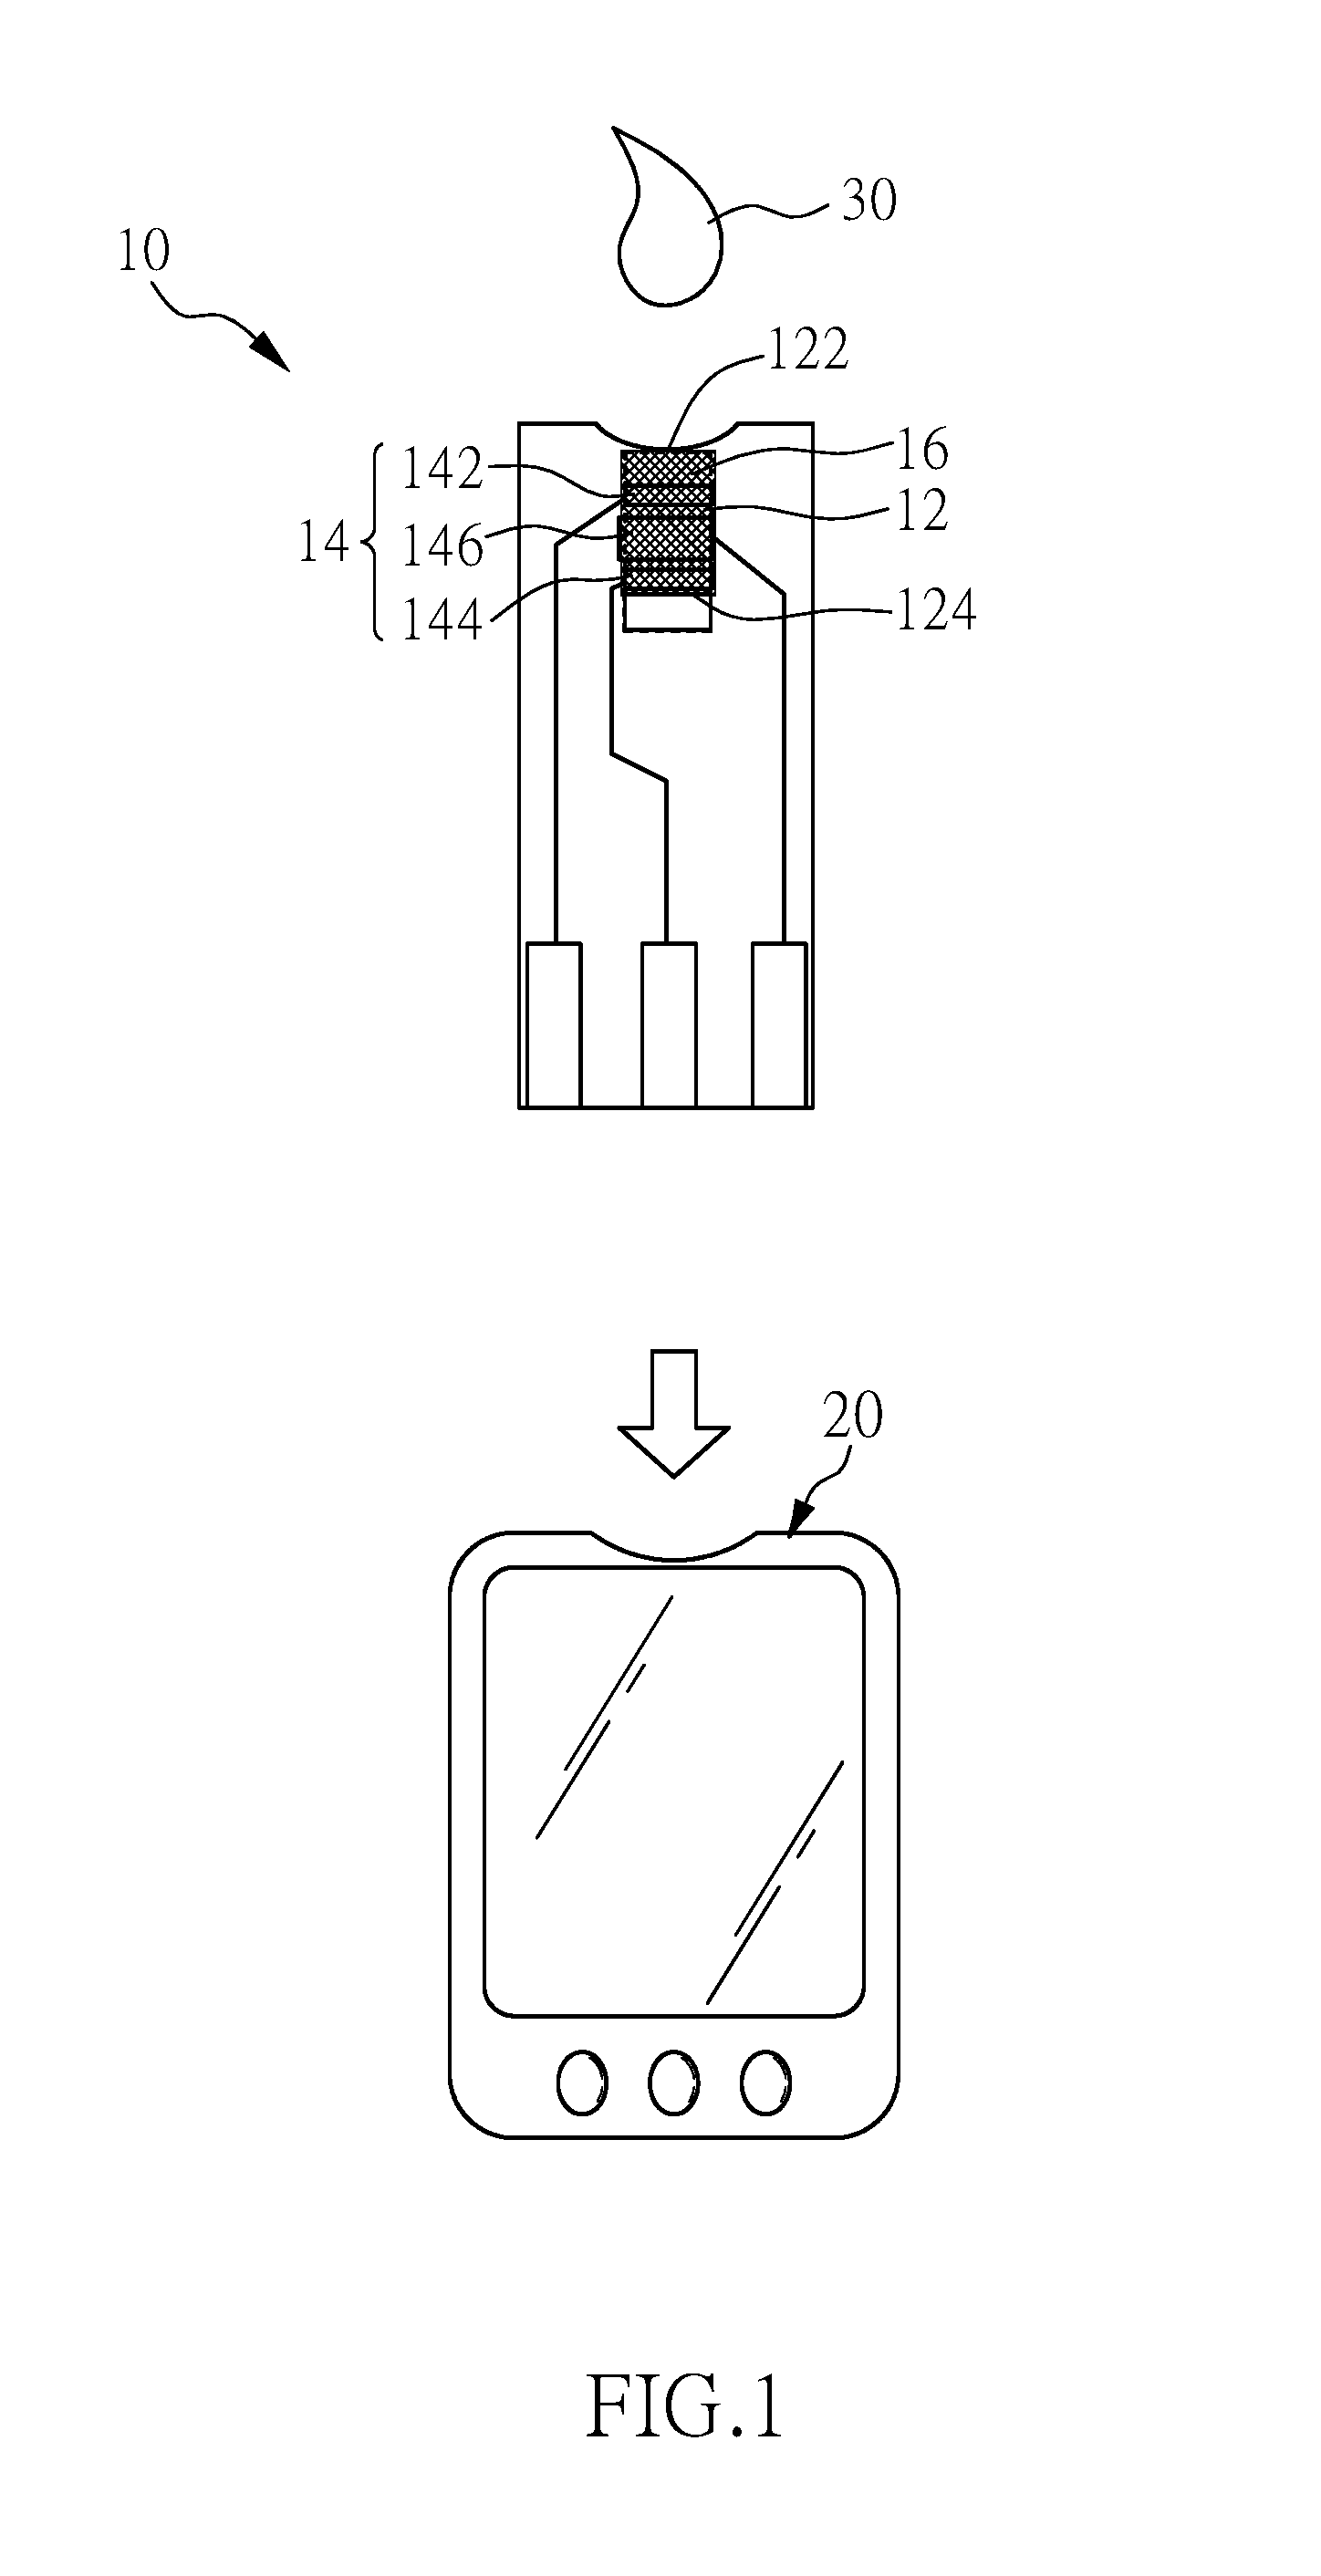 Test Strip and Detecting Device